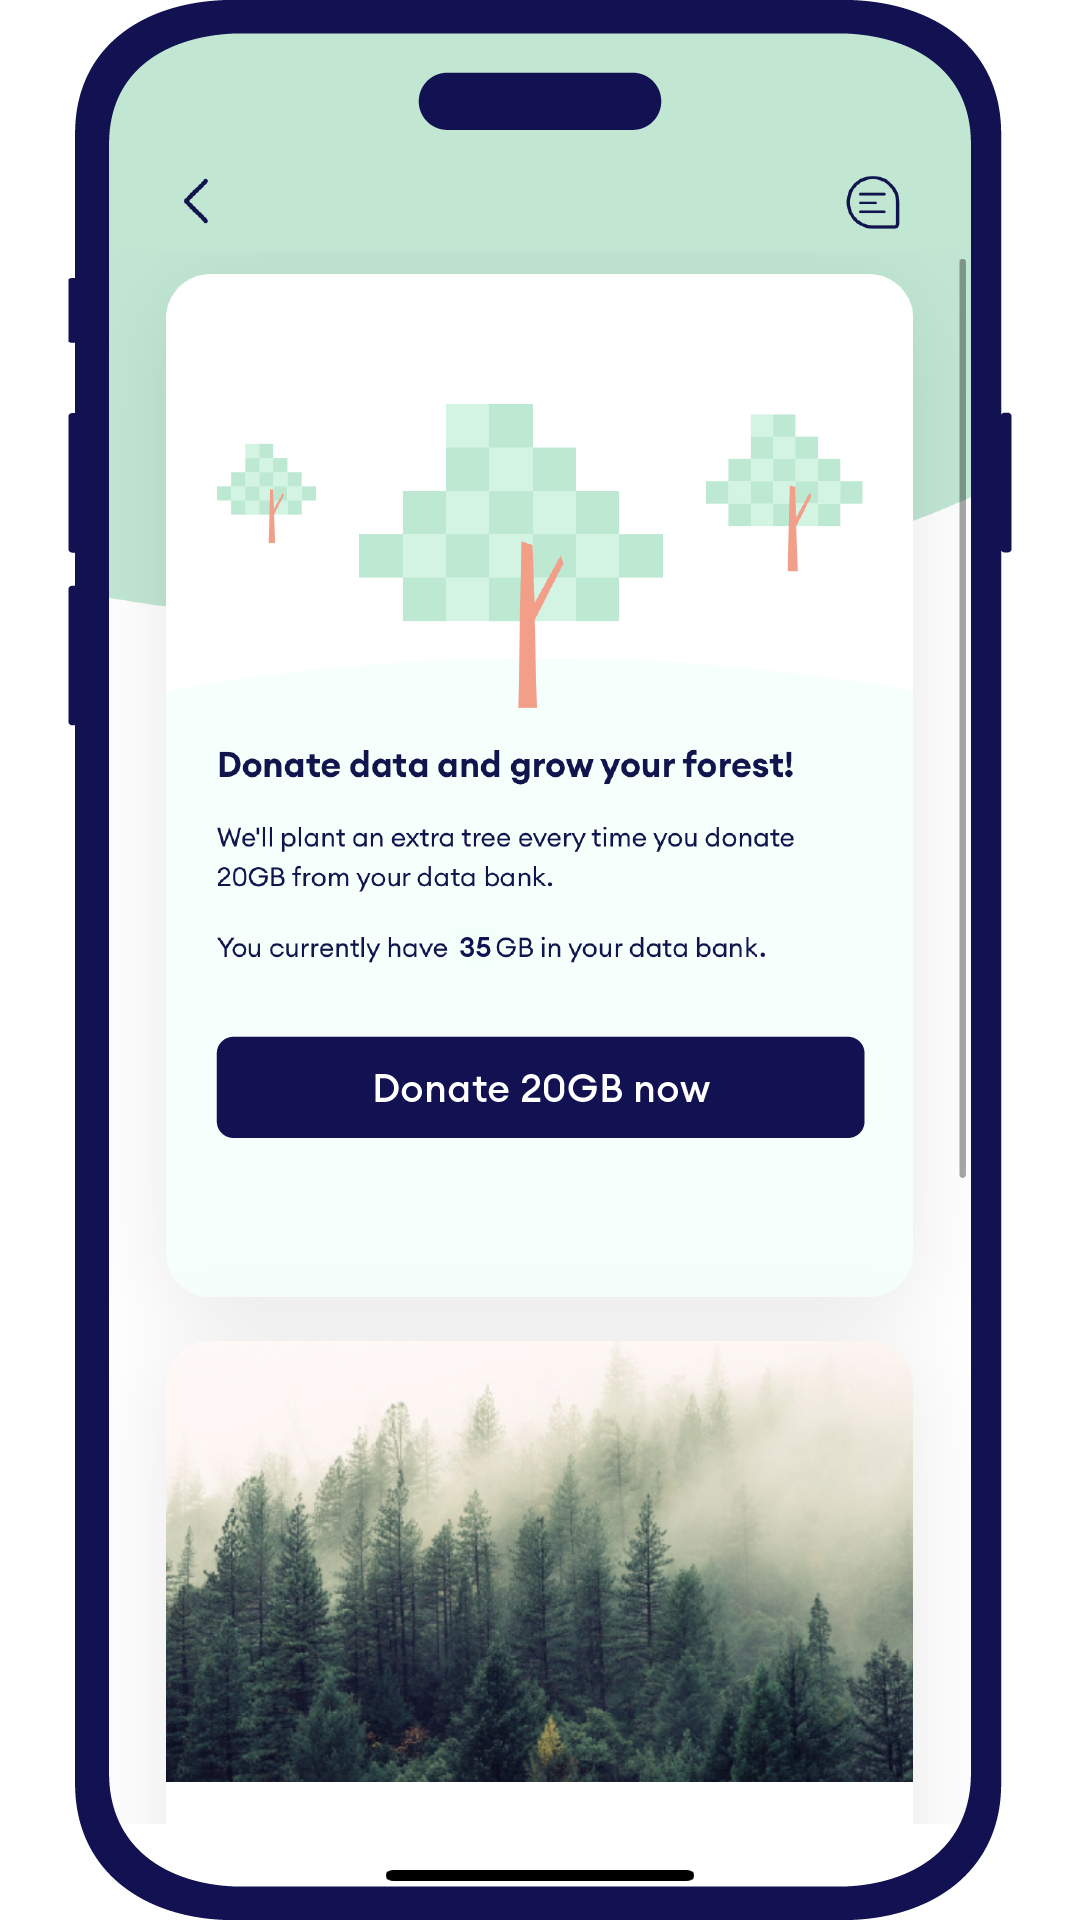 Donate data to plant extra trees